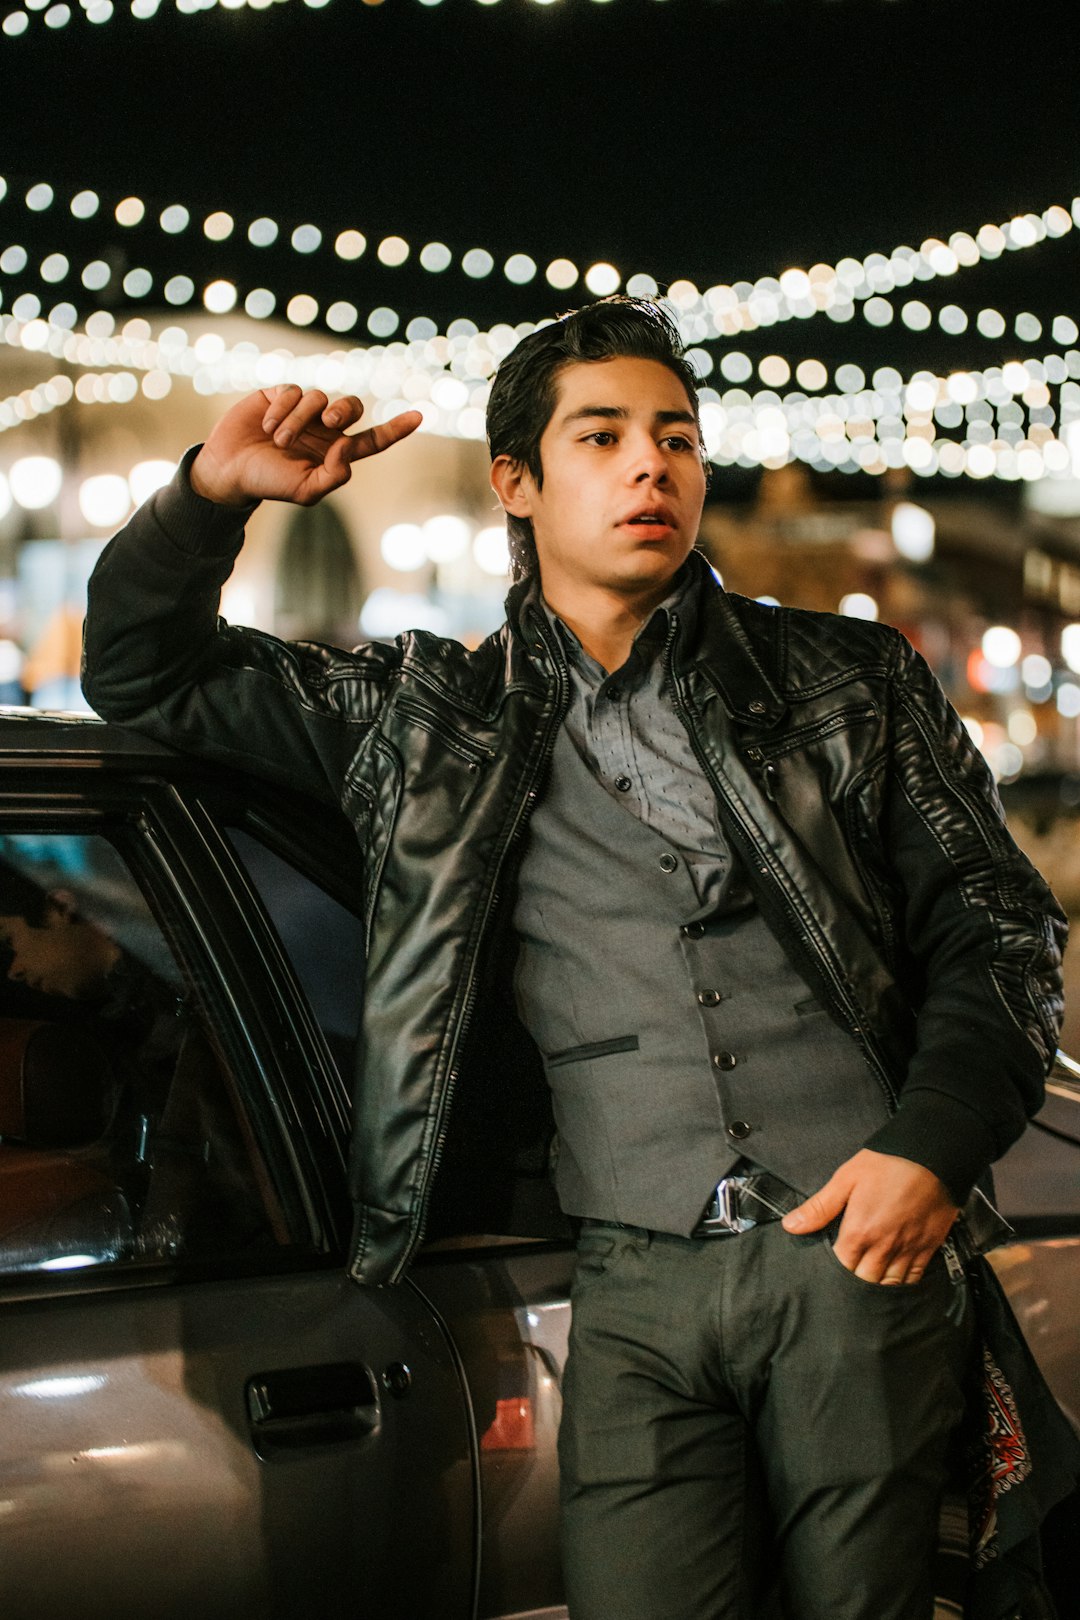 man in black leather jacket standing beside black car during night time